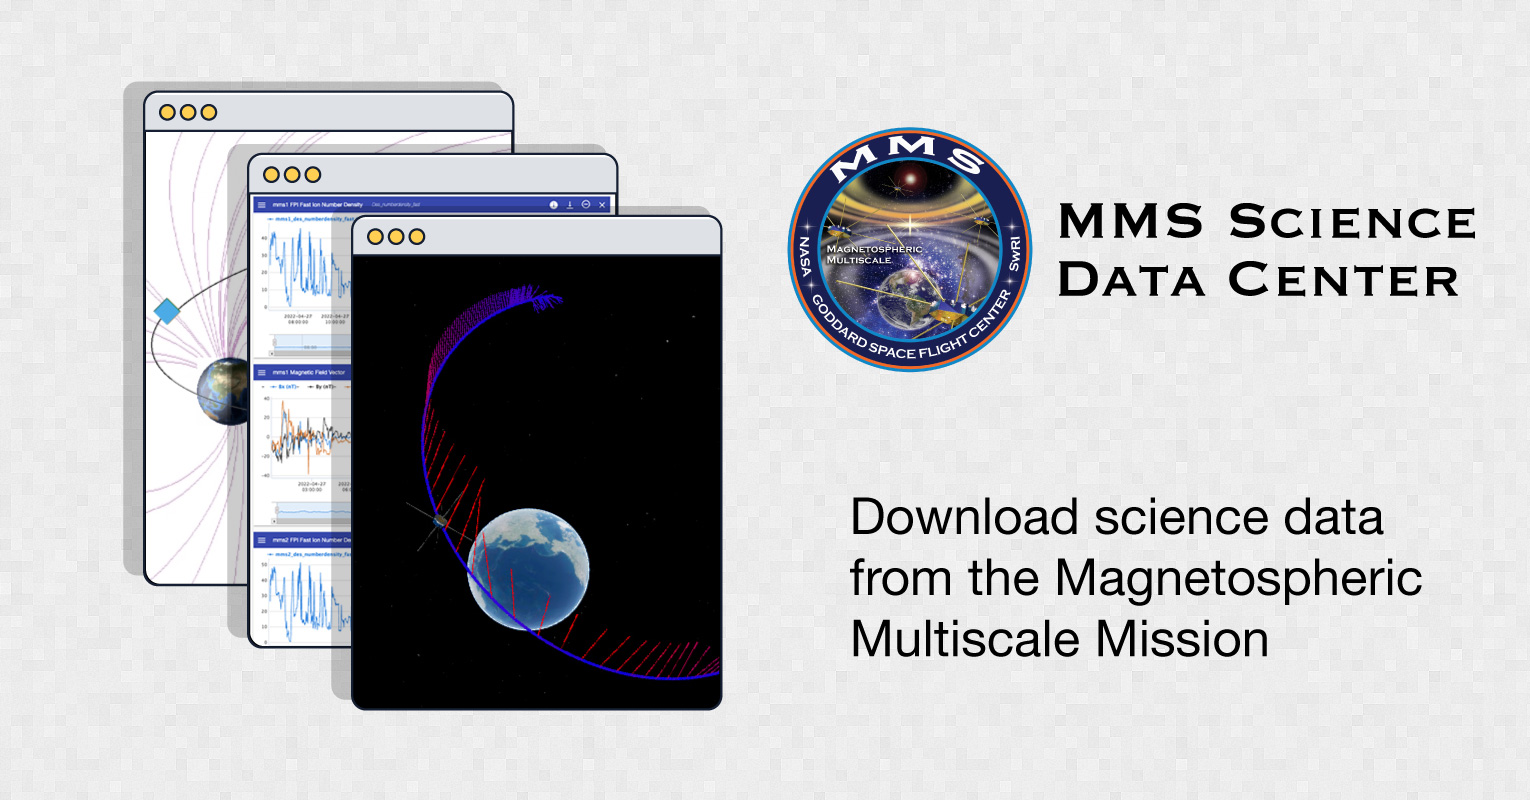 Magnetospheric Multiscale (MMS) Mission